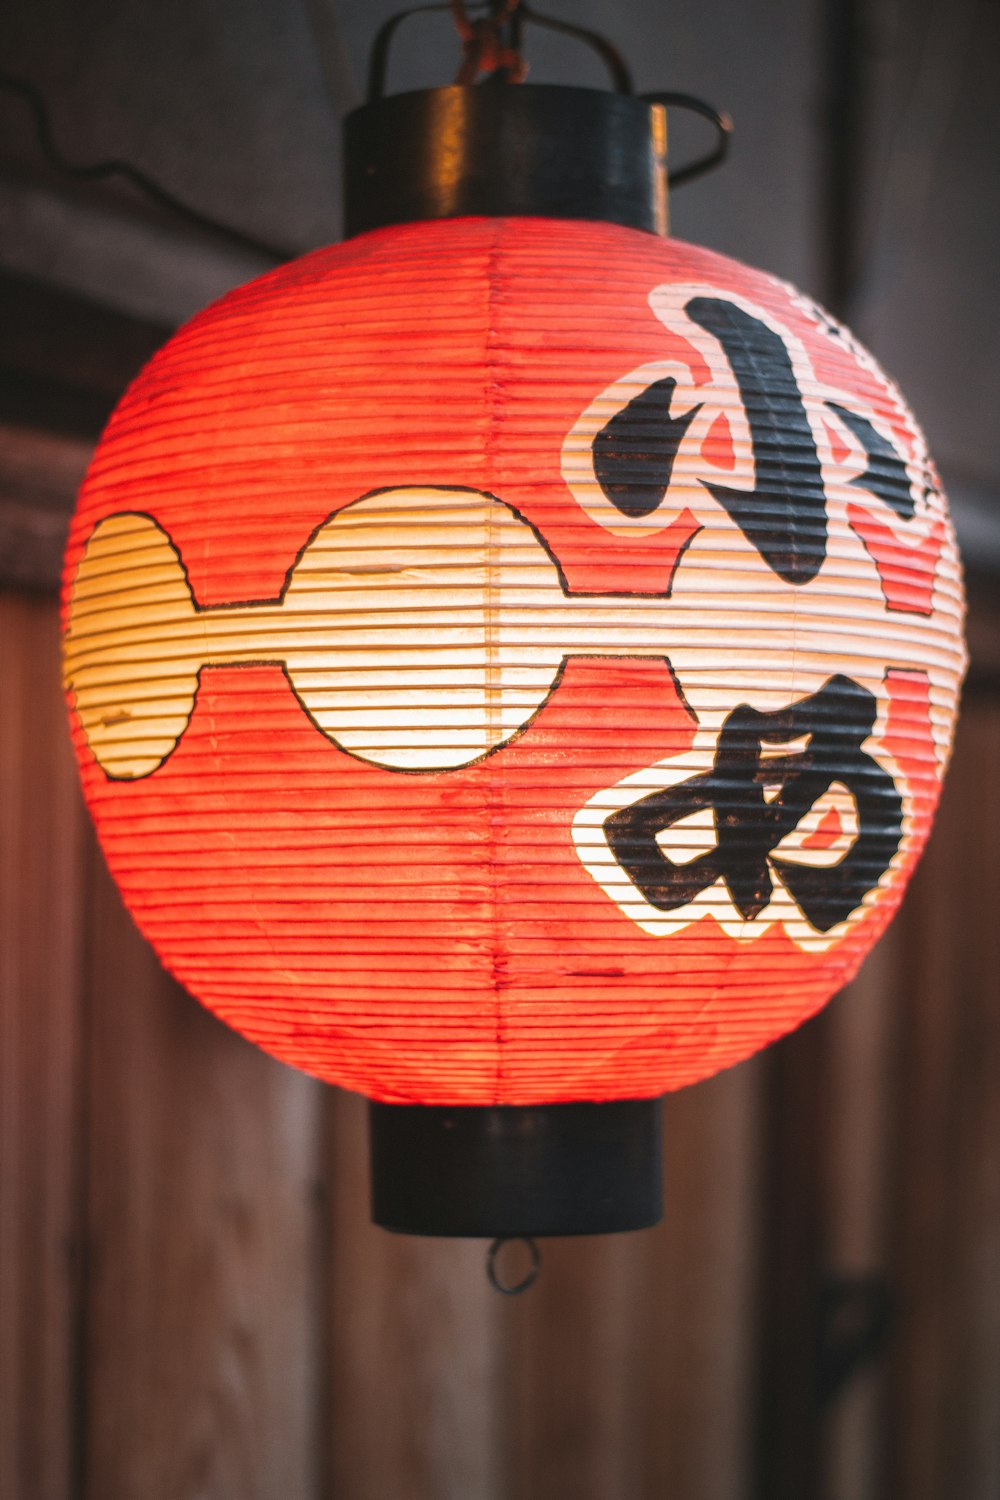 a red lantern hanging from a wooden ceiling